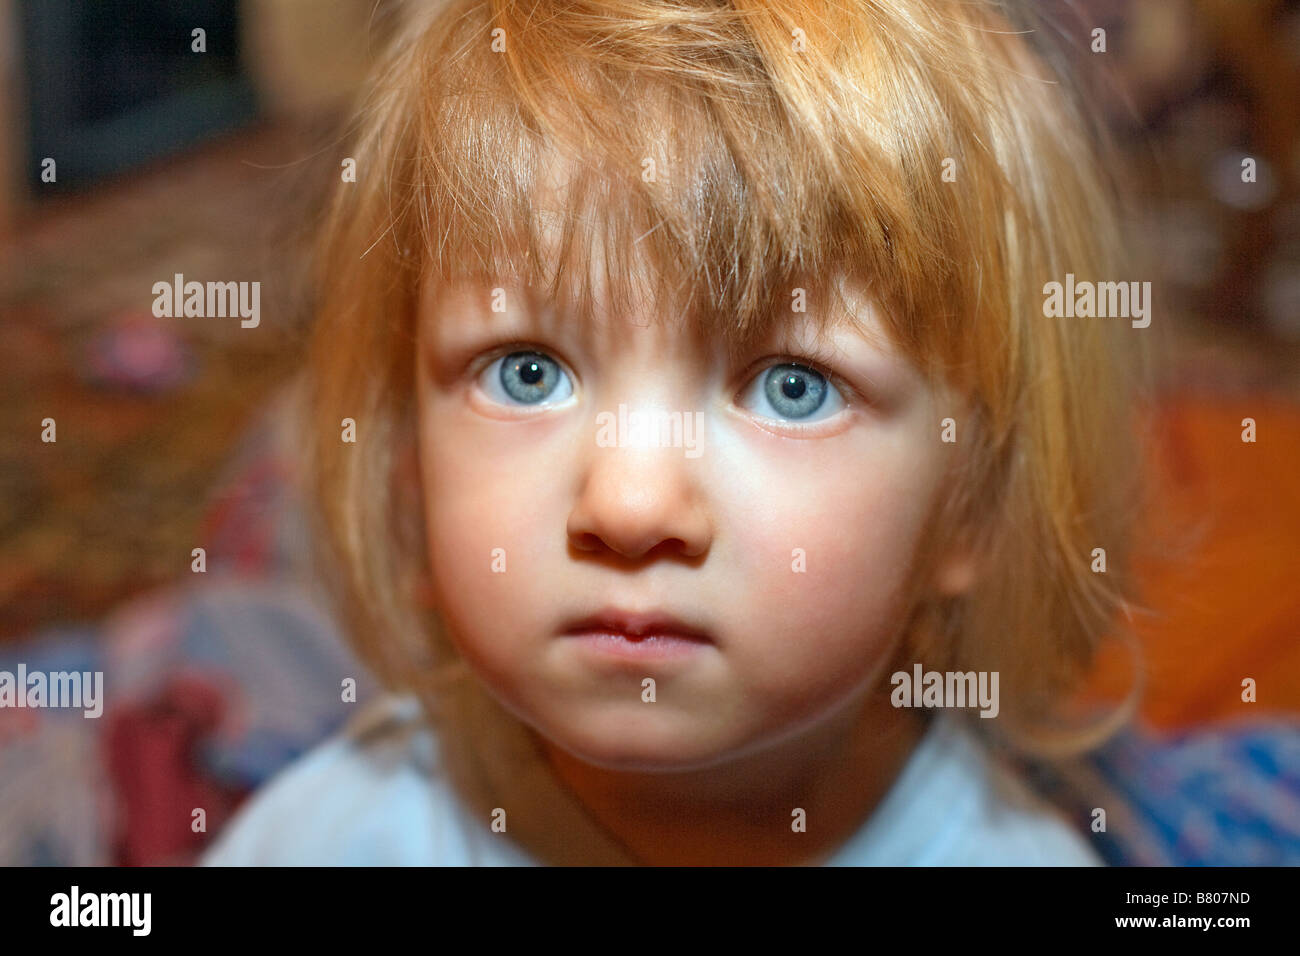 TWO YEAR OLD BOY WITH LONG HAIR AND BIG EYES Stock Photo